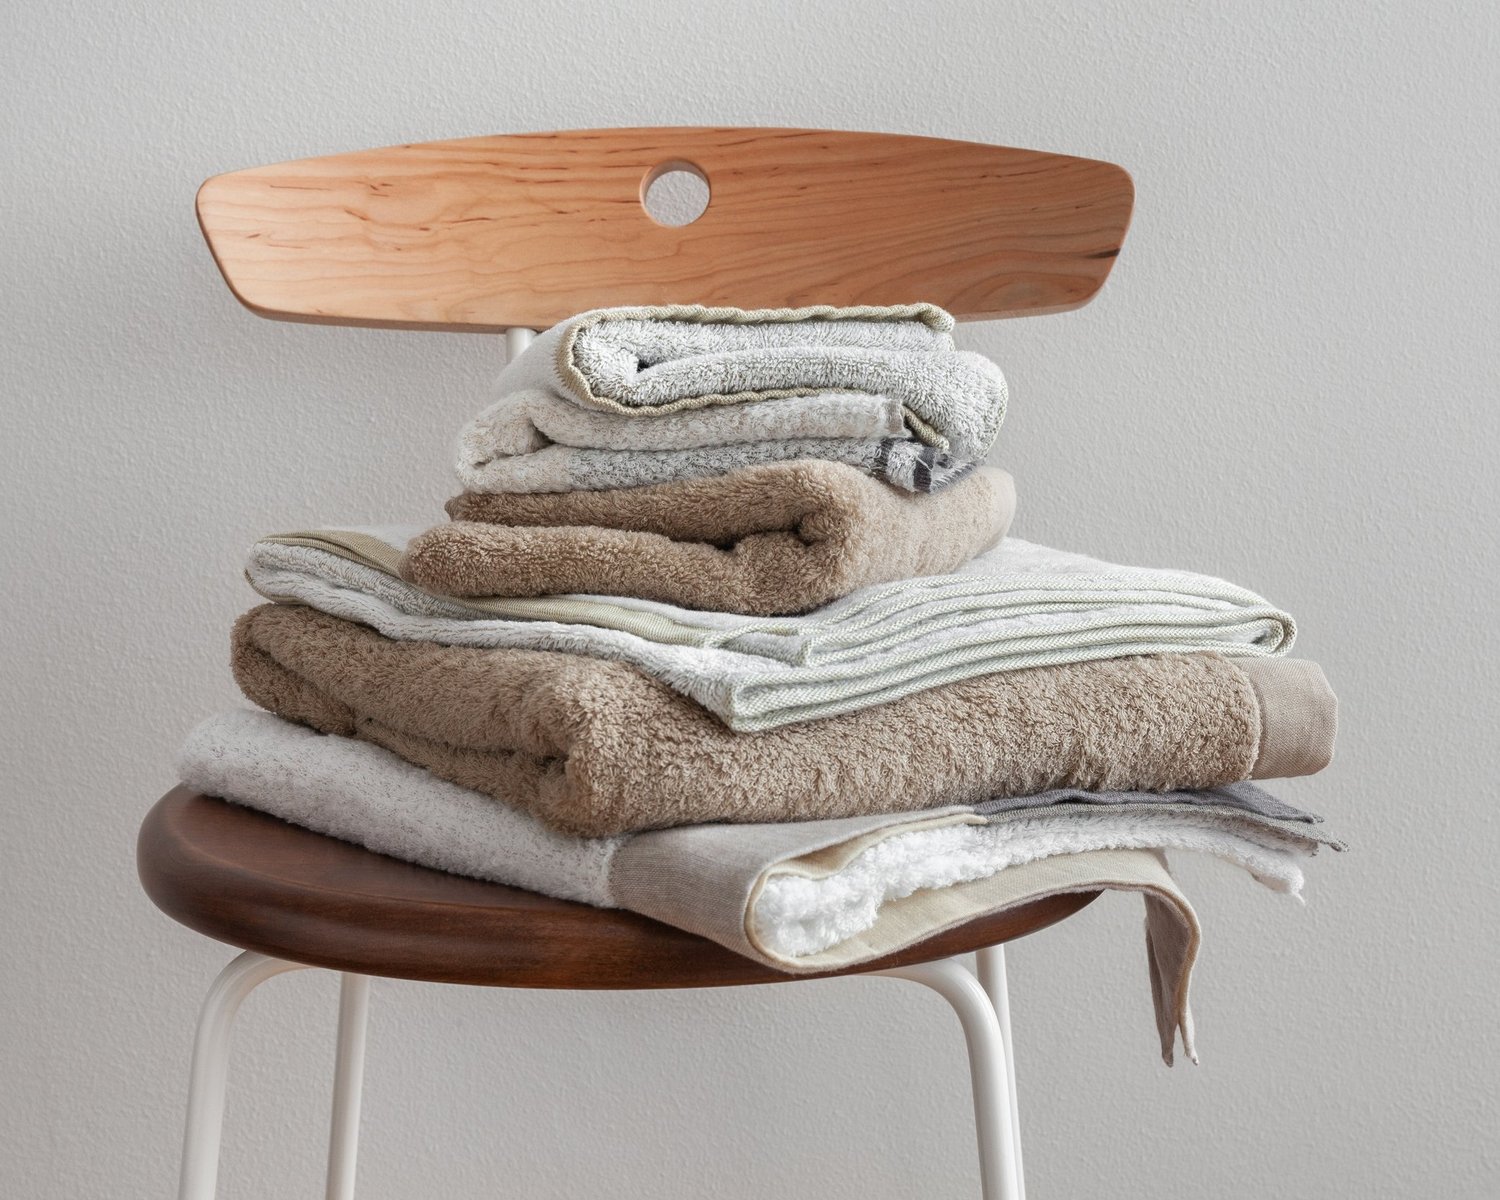 Fluffy & Absorbent Towels: A Guide to Choosing Quality Bath Towels